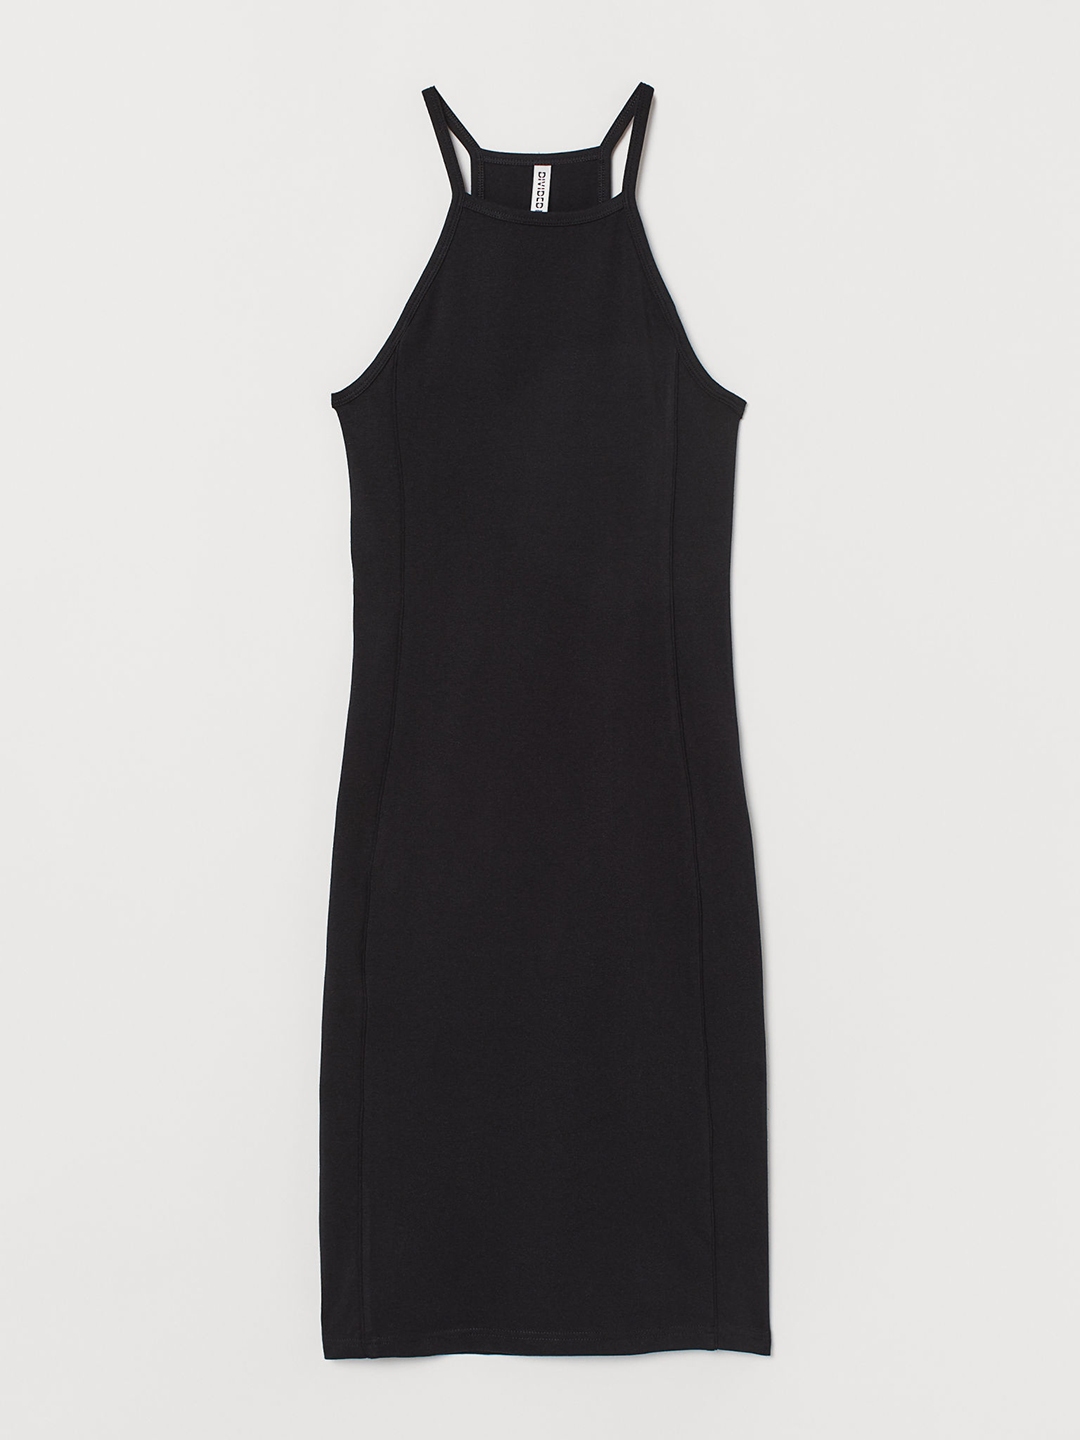 Buy H&M Women Black Solid Fitted Dress - Dresses for Women 11415146 ...